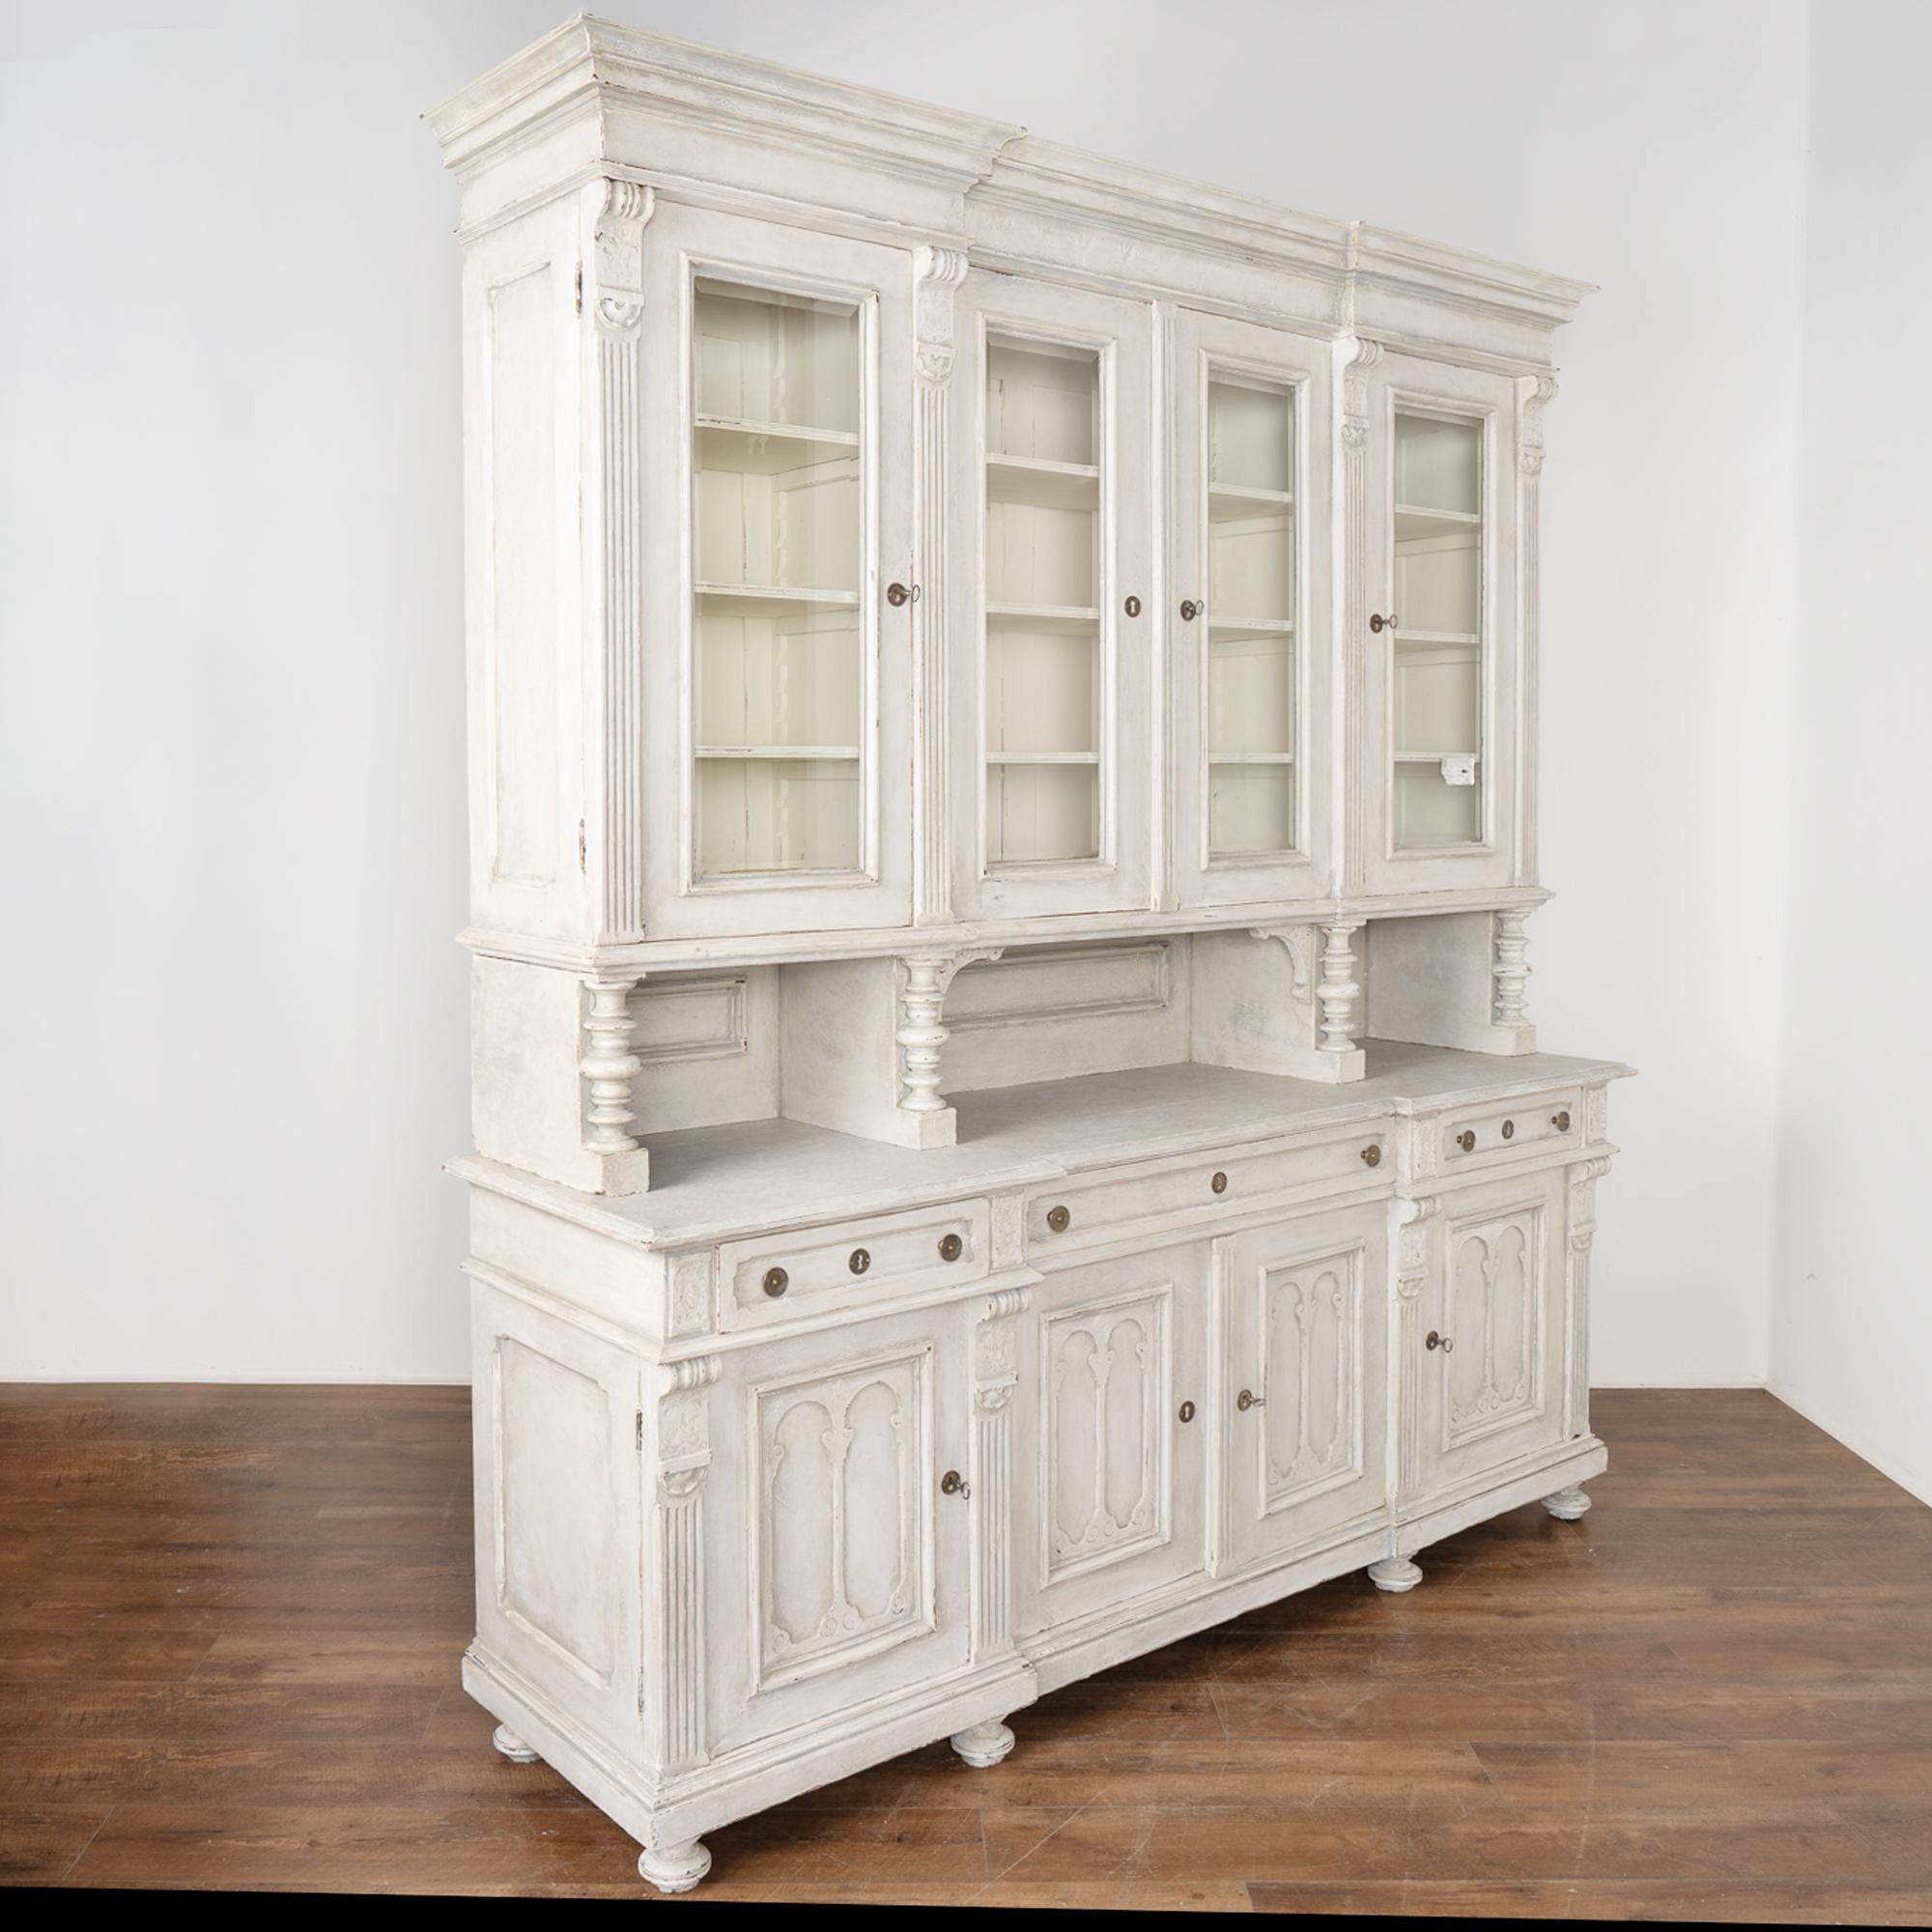 French country large display cabinet or bookcase in two sections.
Oak wood later professionally painted in layers of white and light grey with softly distressed finish fitting the age and grace of this stately cabinet.
Enlarge photos to appreciate